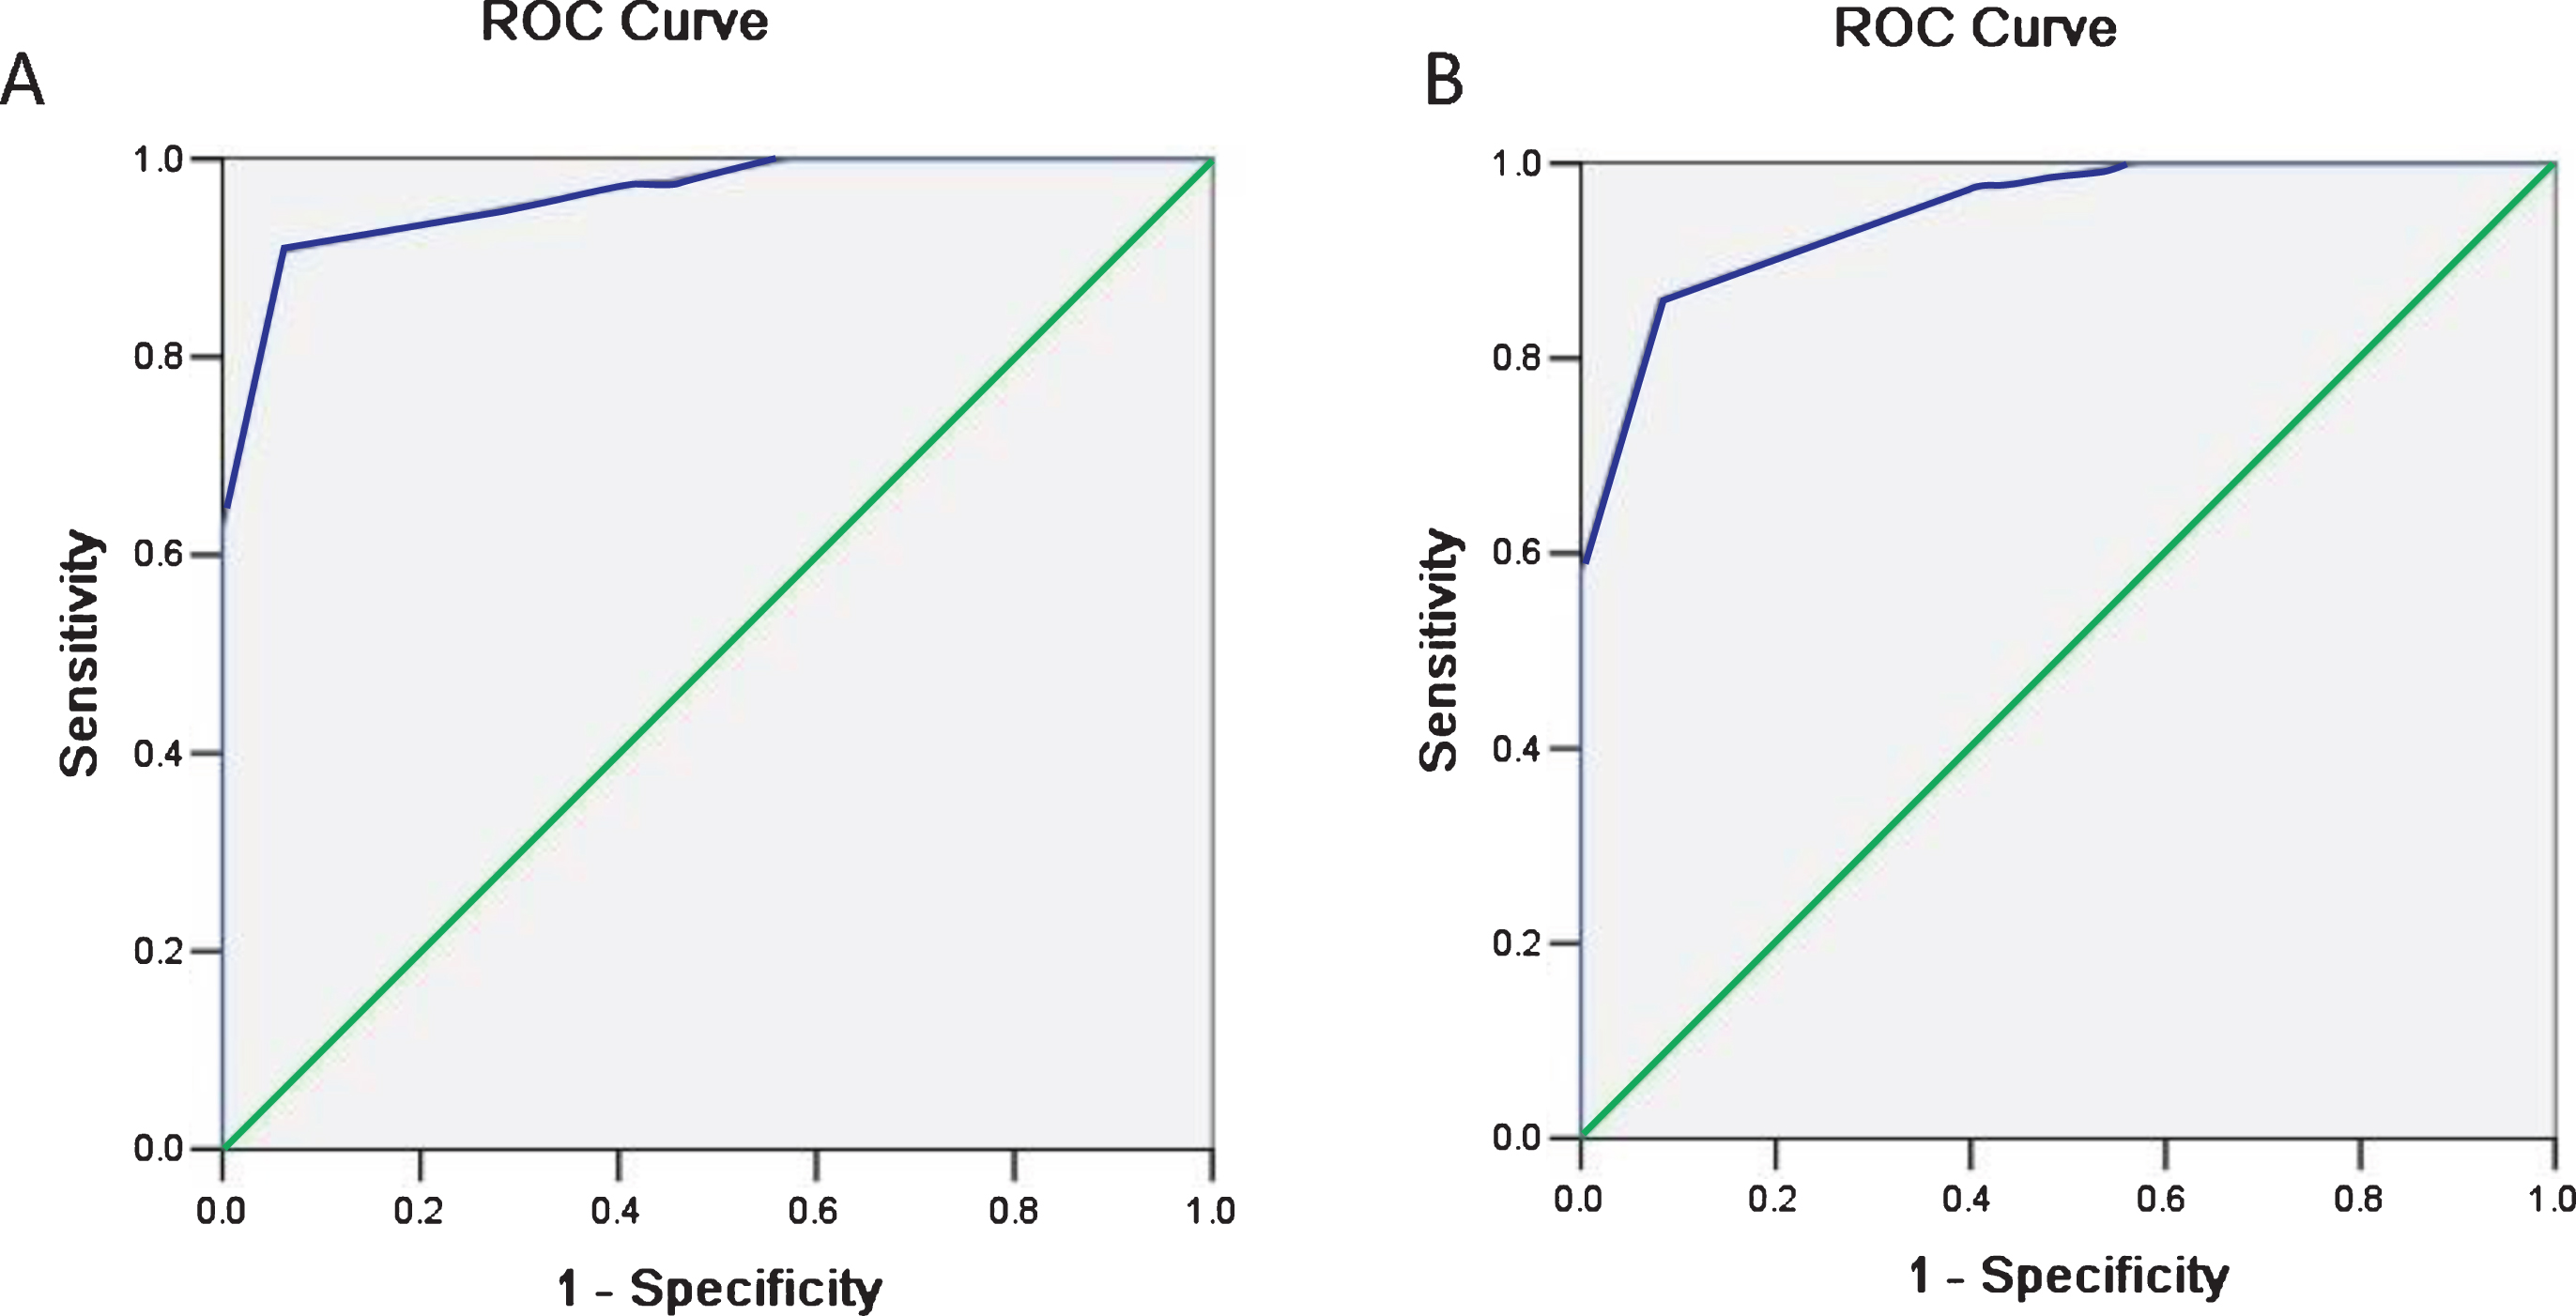 Receiver operating characteristic (ROC) curve was plotted and the area under the curve (AUC) was calculated. The corresponding AUC values for two radiologists (A and B) are 0.96 [95% confidence interval (CI): 0.92, 0.99] and 0.94 [95% CI: 0.90, 0.98], respectively.